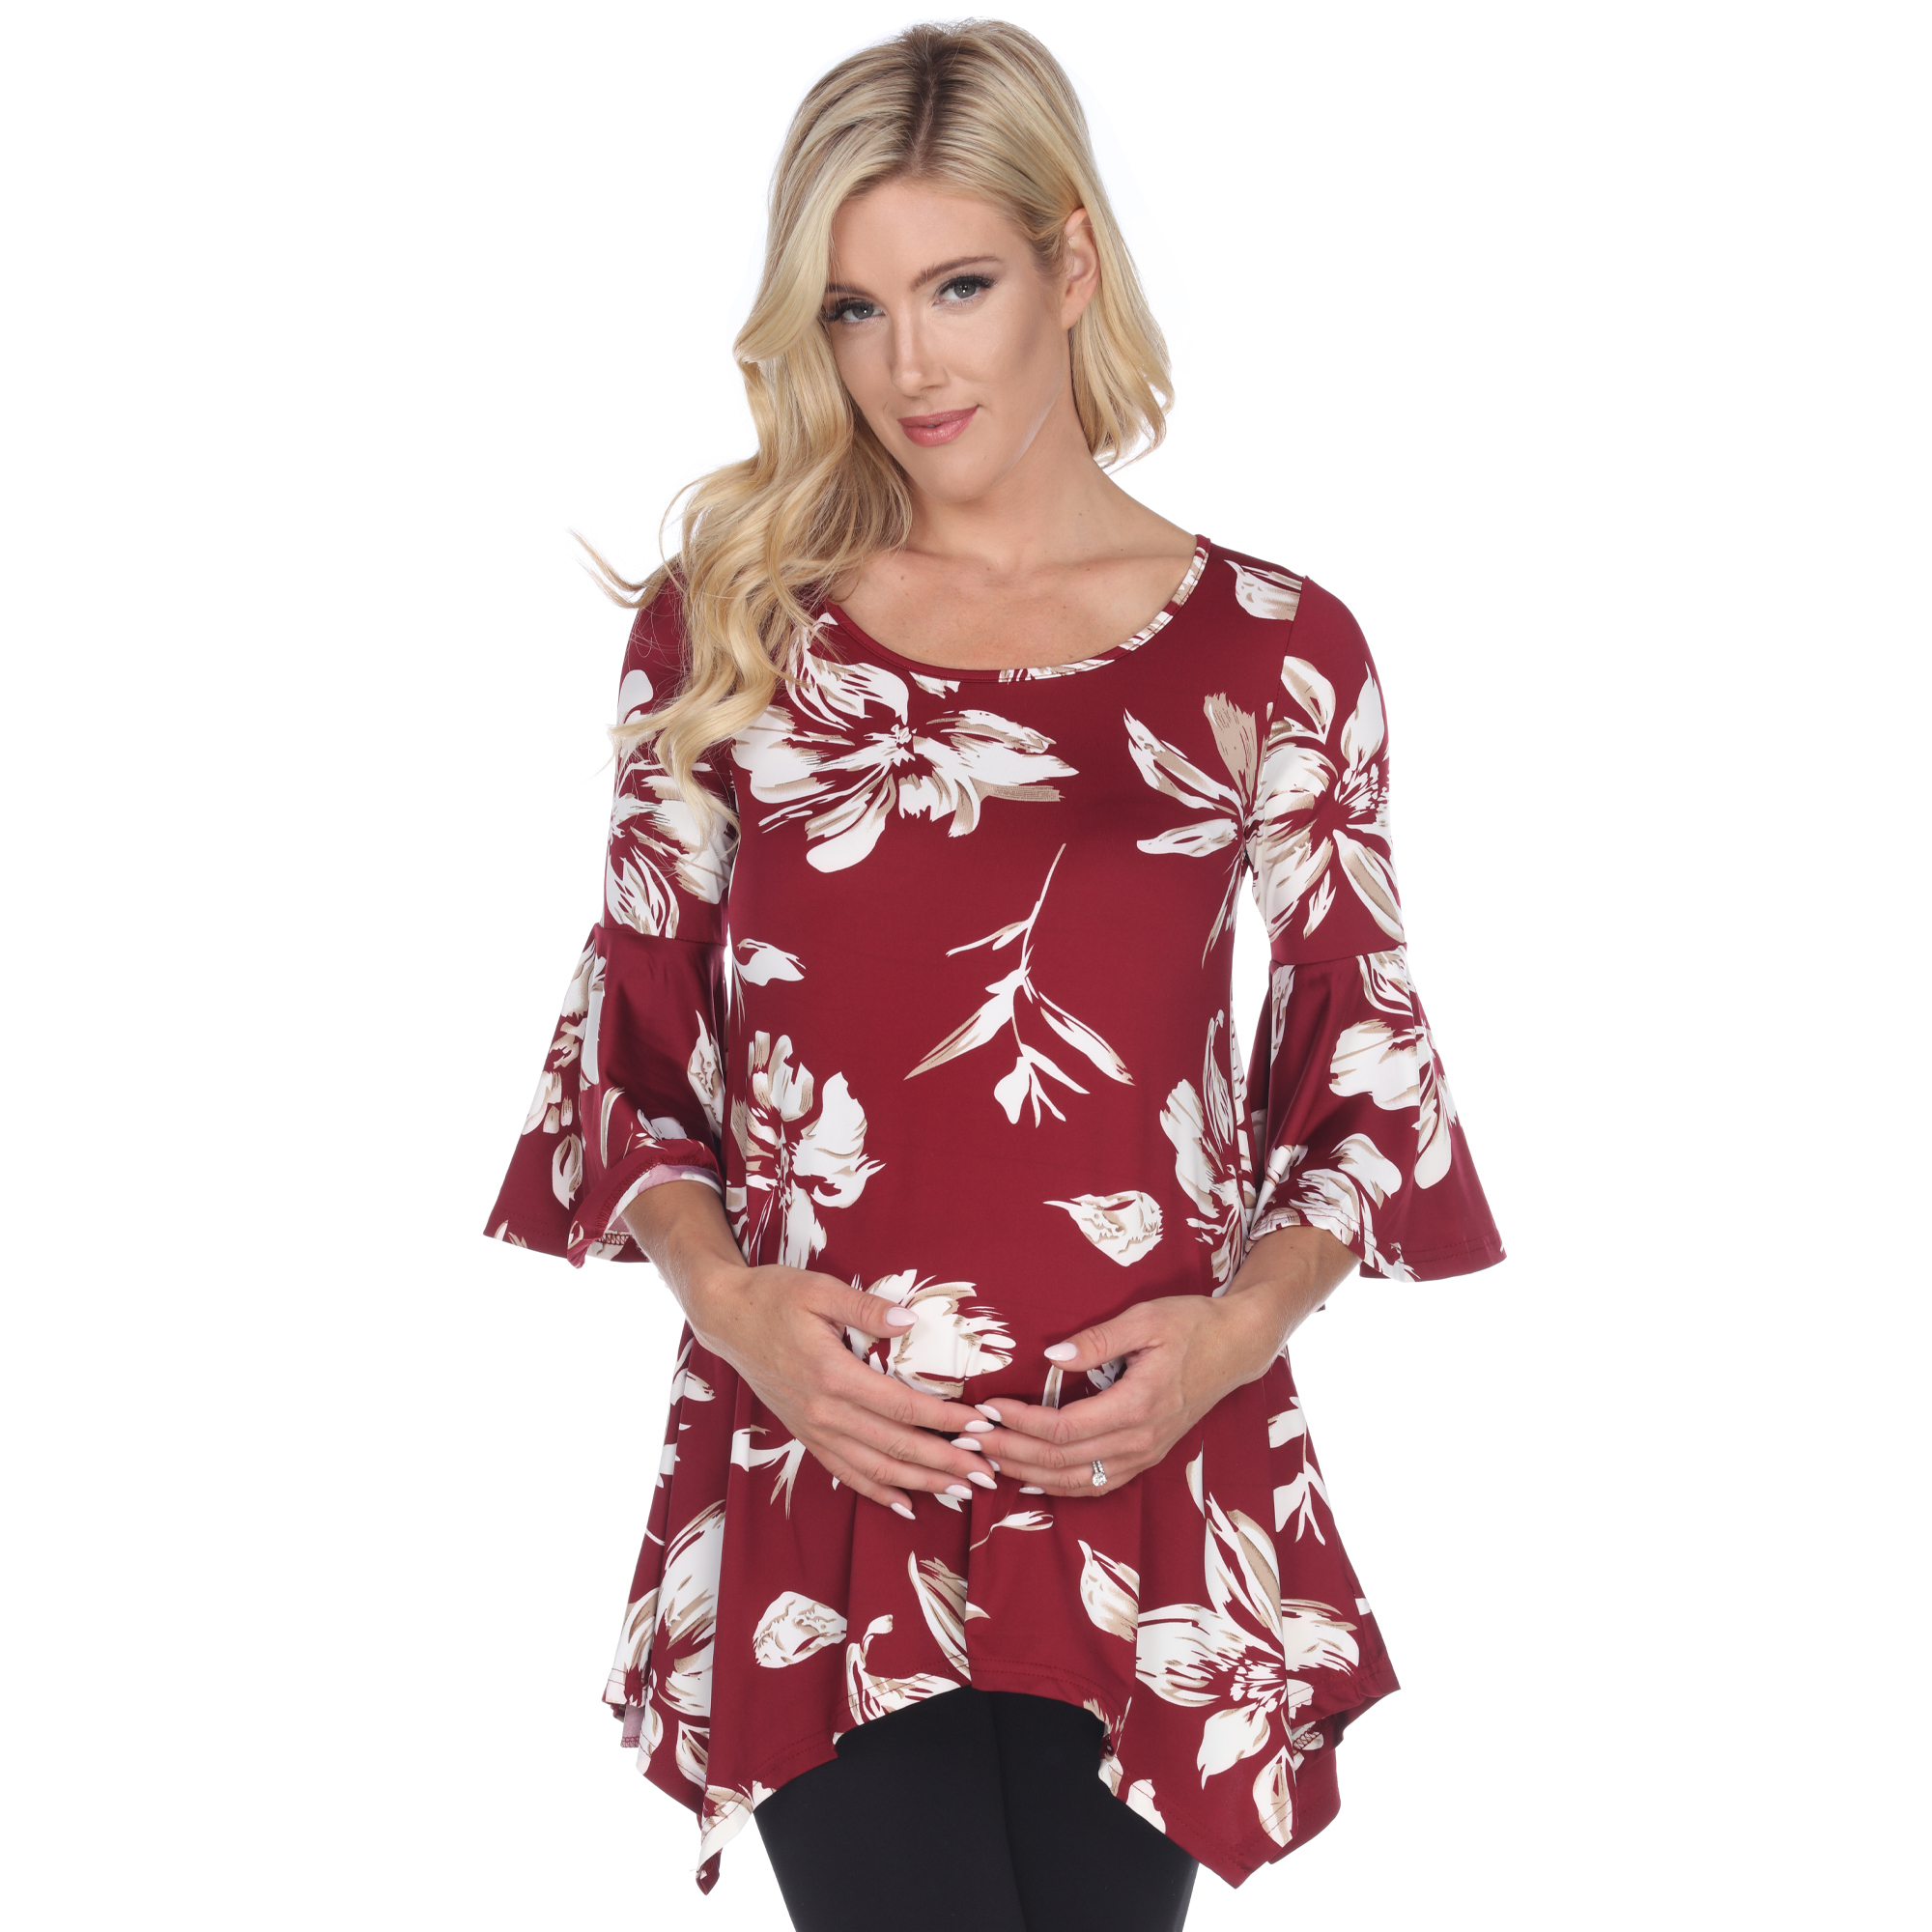 White Mark Women's Maternity Floral Print Quarter Sleeve Tunic Top With Pockets - Red, 2X